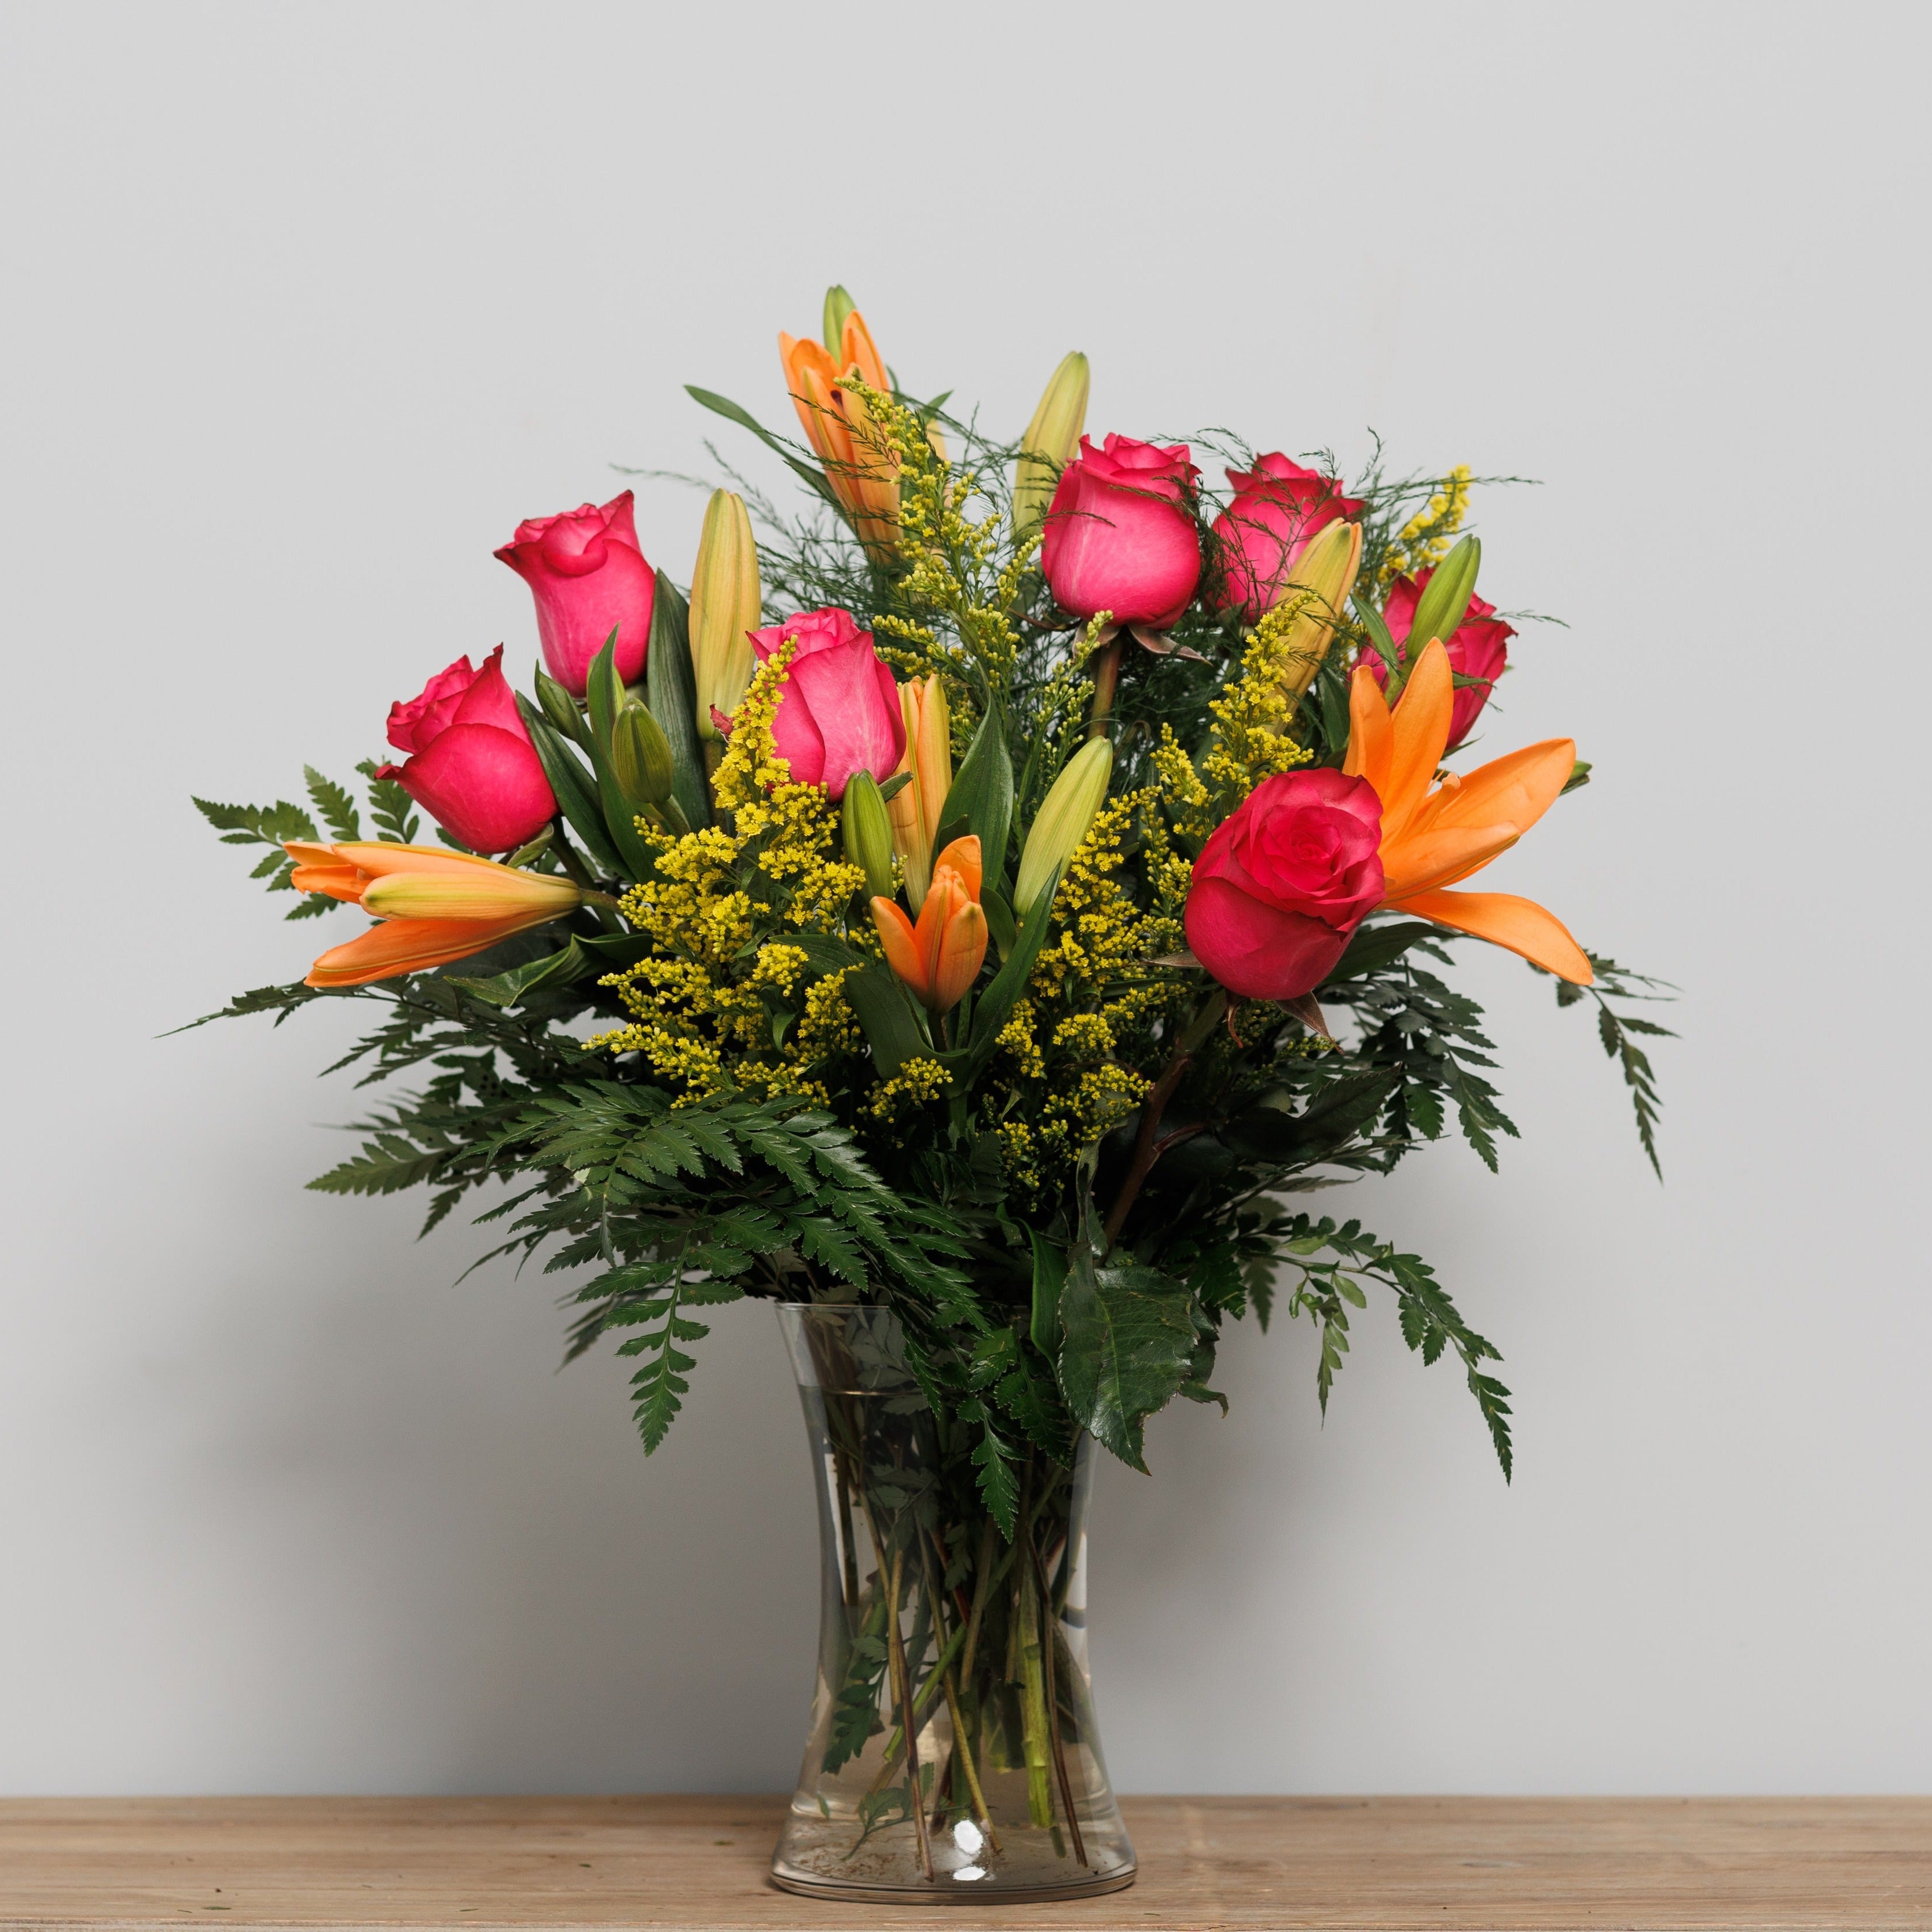 A vase arrangement with orange tiger lilies and hot pink roses.